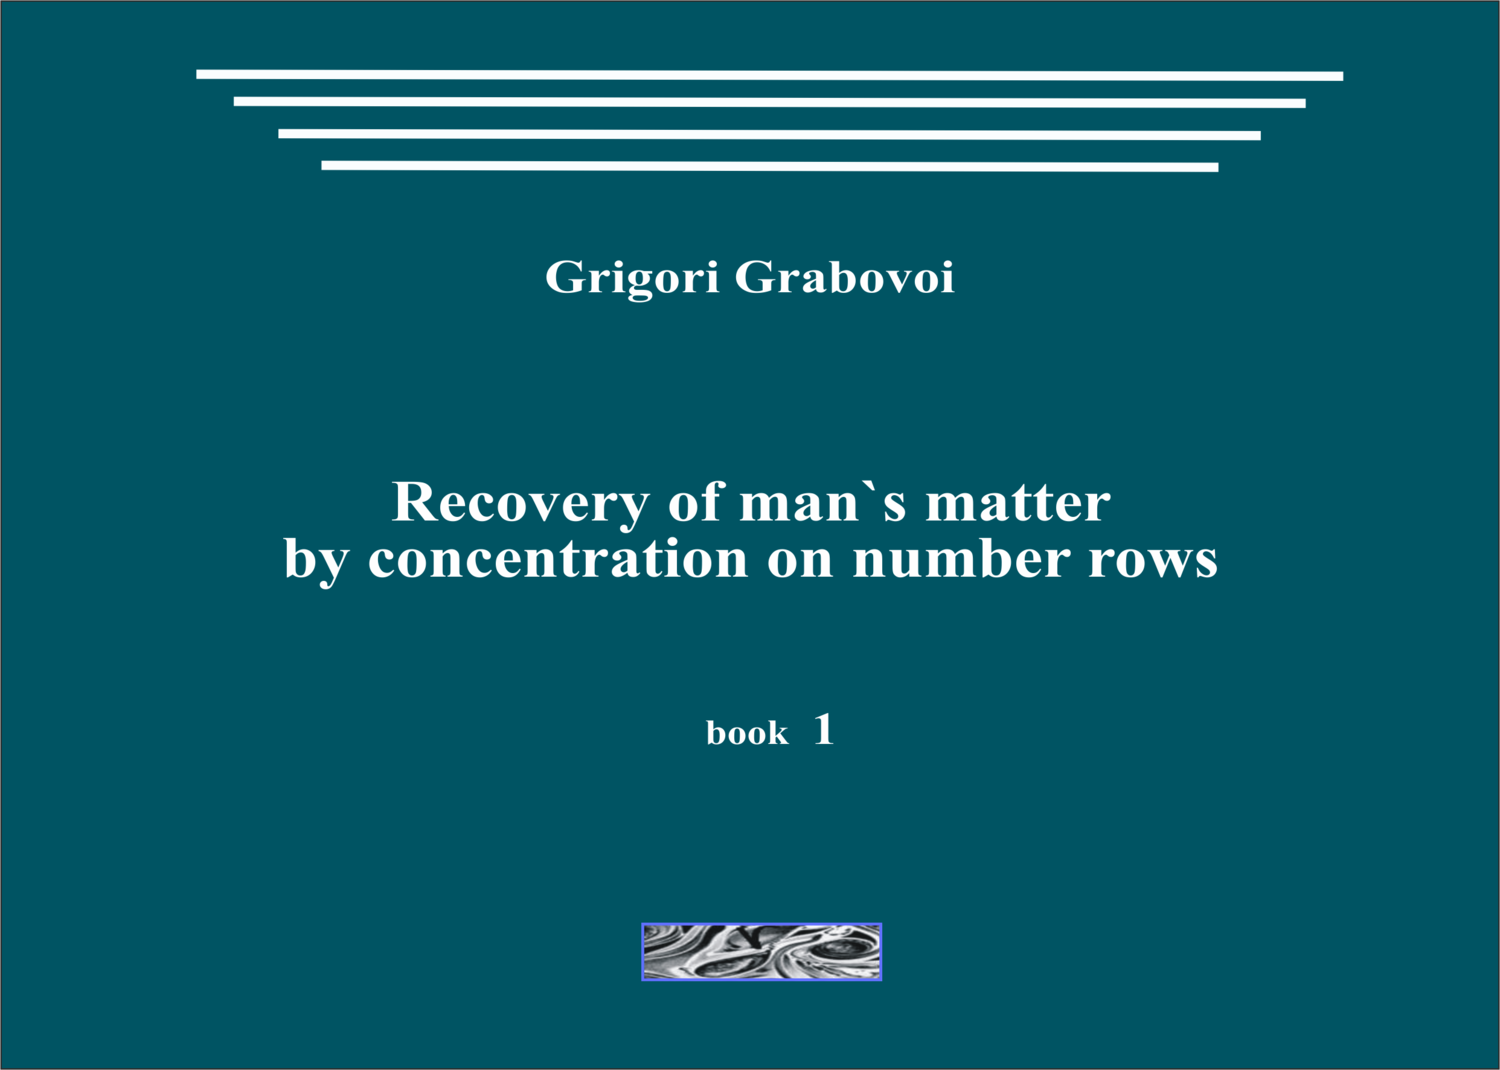 Recovery of man's matter by concentration on number rows (book 1)